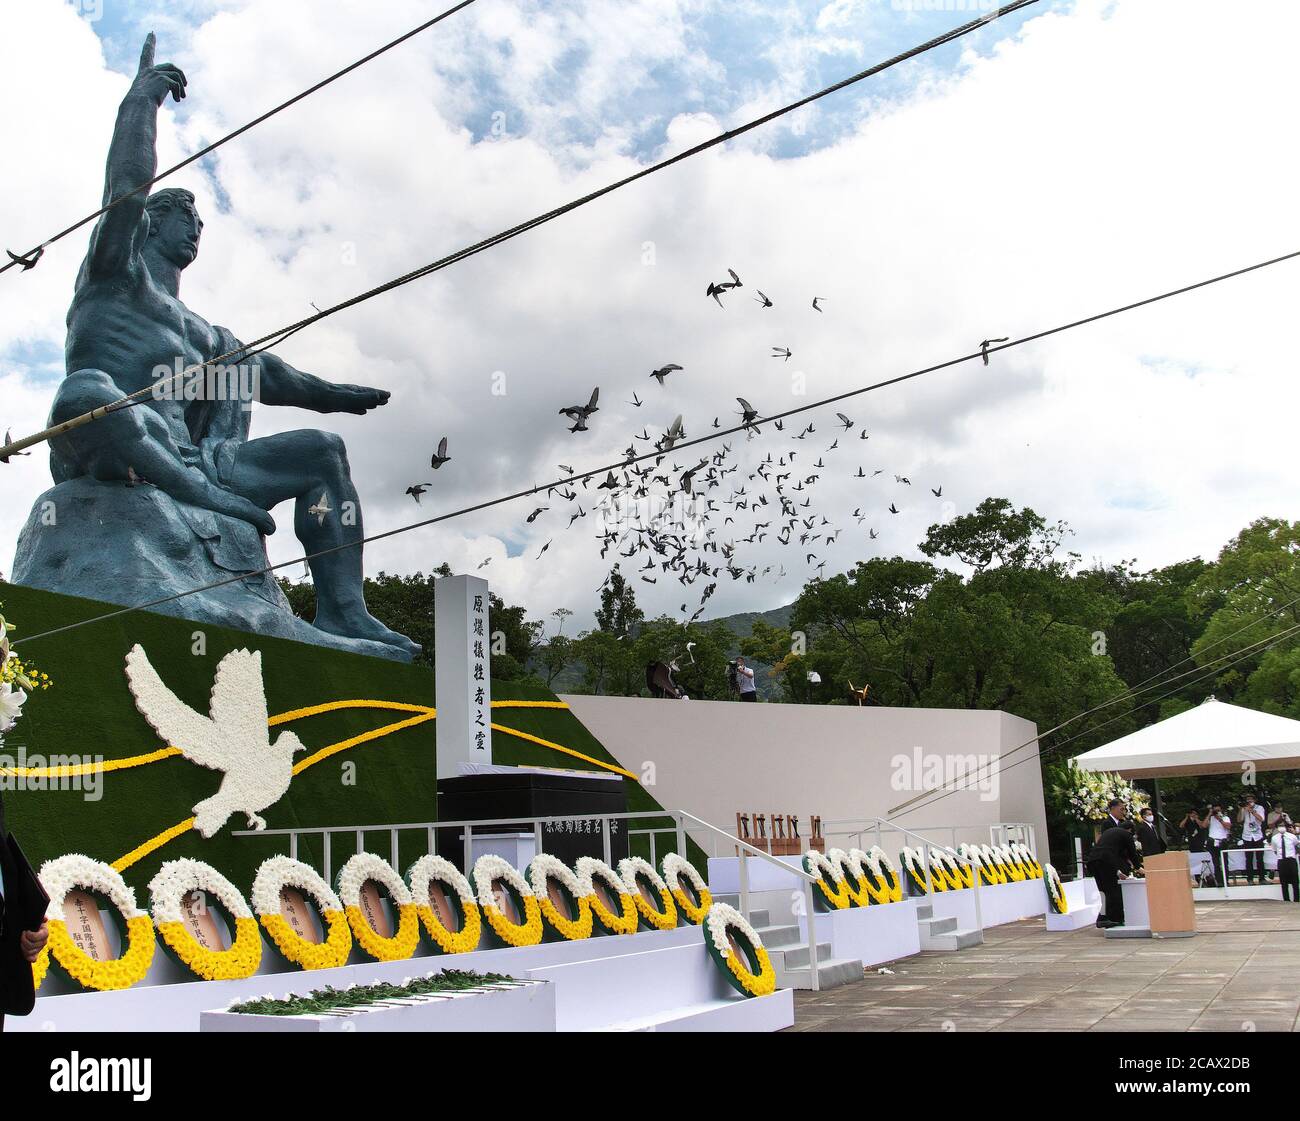 Nagasaki, Japan. 09th Aug, 2020. Released doves fly during the ceremony for the atomic bomb victims marking the 75th anniversary of the atomic bombing of Nagasaki at the Peace Park in Nagasaki, Japan on Sunday, August 9, 2020. The ceremony this year was scaled down to prevent the spread of the novel coronavirus COVID-19. Photo by Kezio Mori/UPI Credit: UPI/Alamy Live News Stock Photo